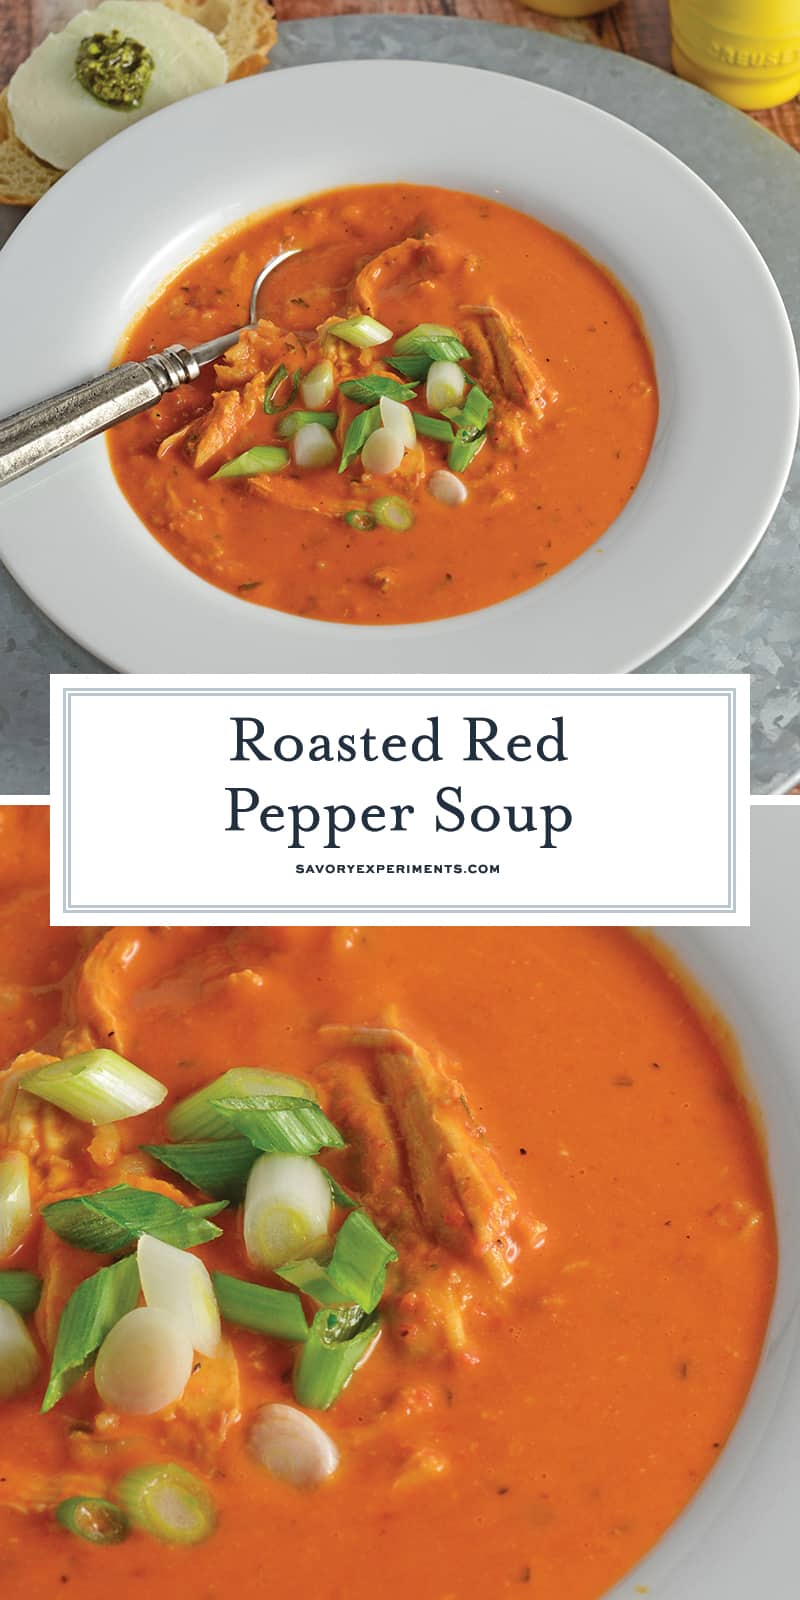 Roasted Red Pepper Soup is gluten and dairy free using hummus, roasted red peppers, pre-cooked chicken, and brown rice for a super quick and healthy soup! #roastedredpeppersoup #recipesthatusehummus #chickensoup www.savoryexperiments.com